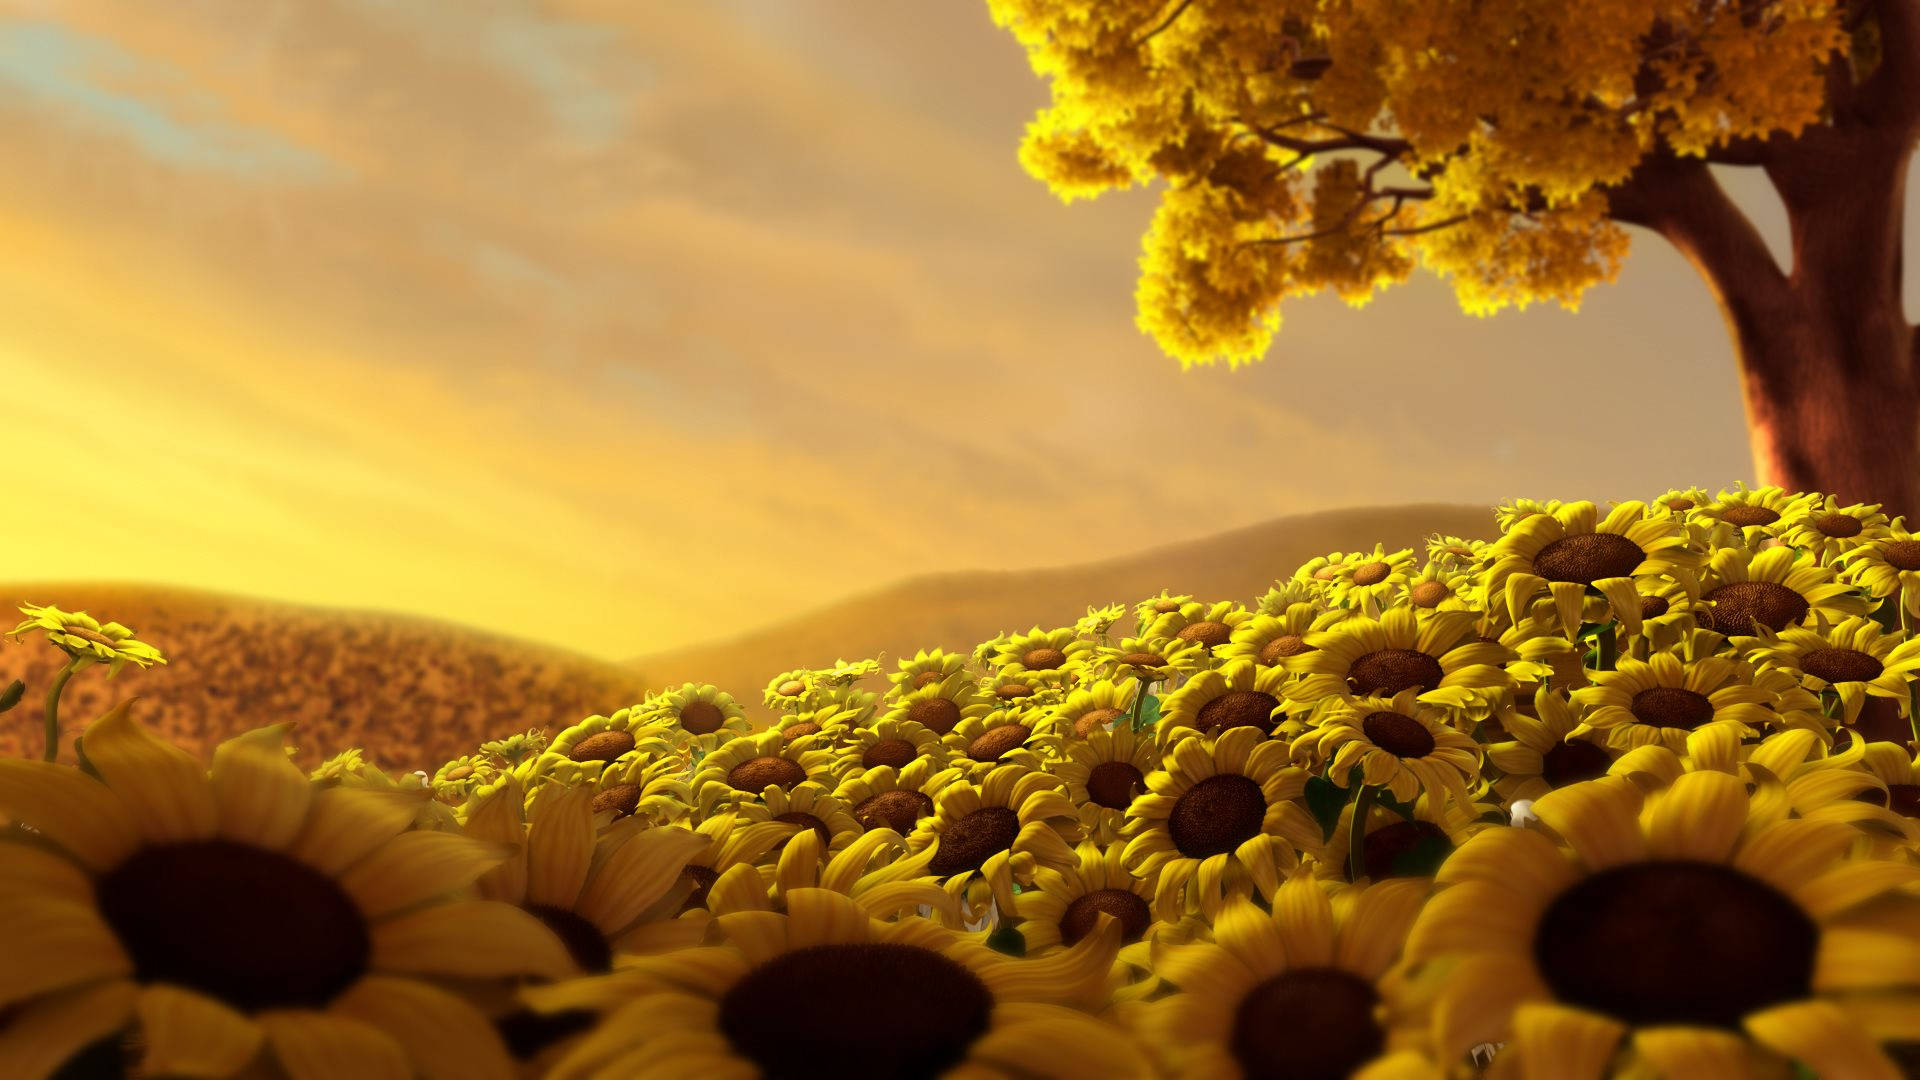 Sunflower Field And A Tree Wallpaper